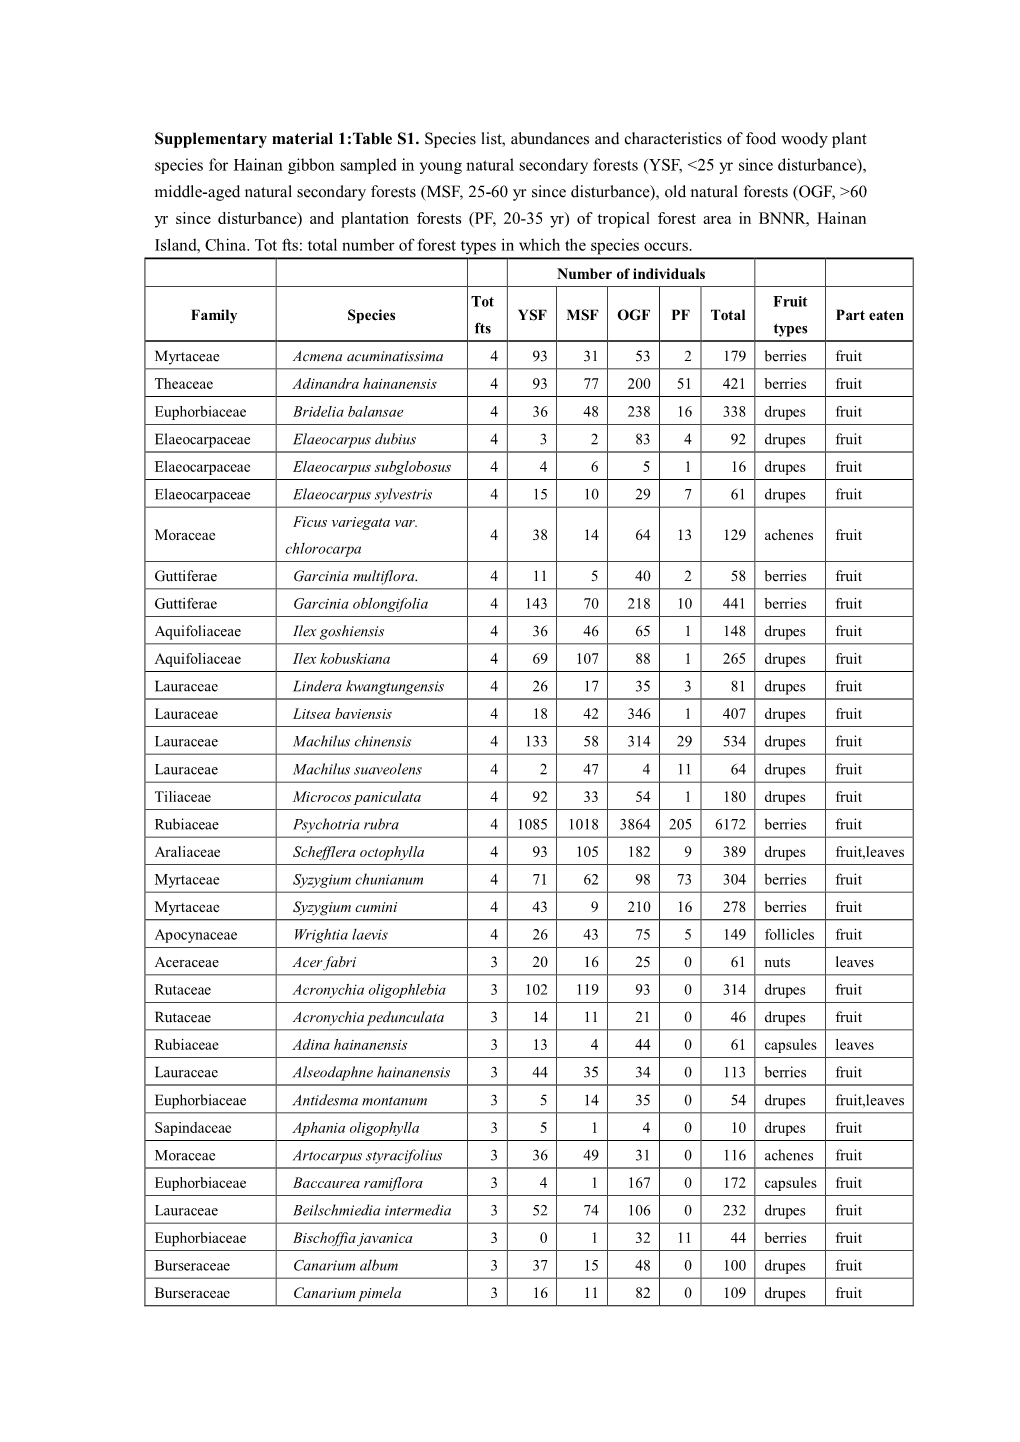 Supplementary Material 1:Table S1. Species List, Abundances and Characteristics of Food Woody Plant Species for Hainan Gibbon Sa